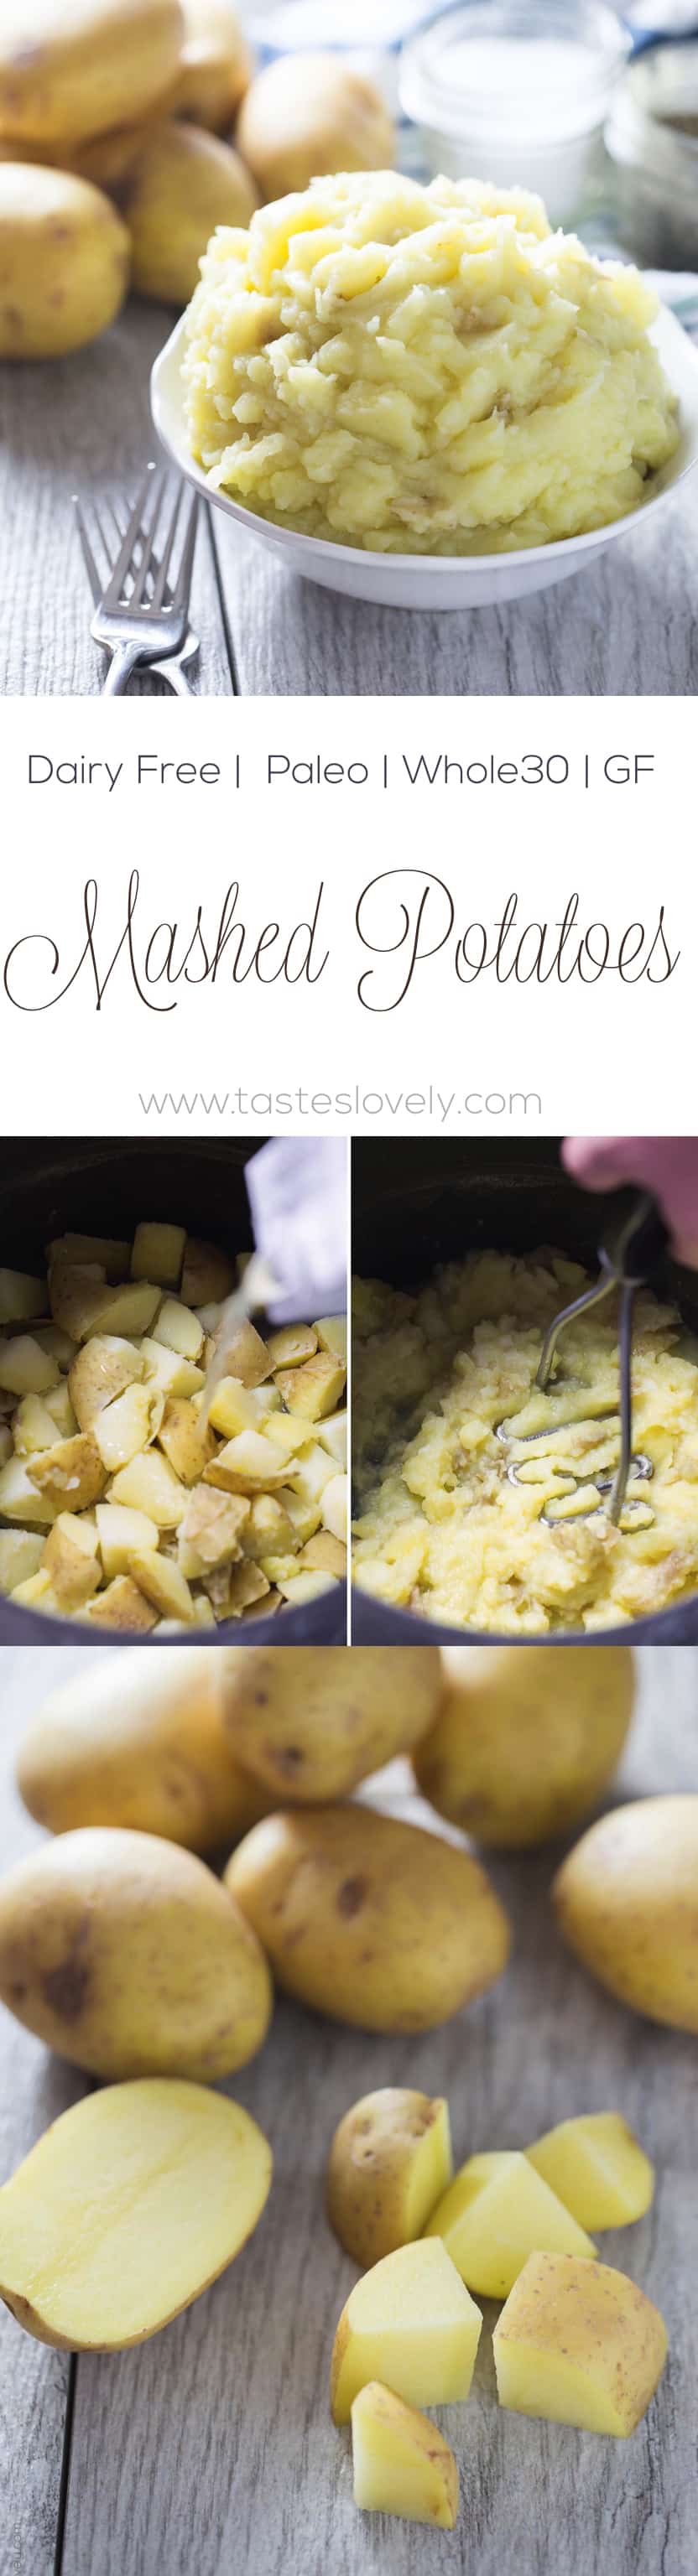 Dairy Free Mashed Potatoes - creamy and delicious with no butter! (gluten free, paleo, Whole30, dairy free)